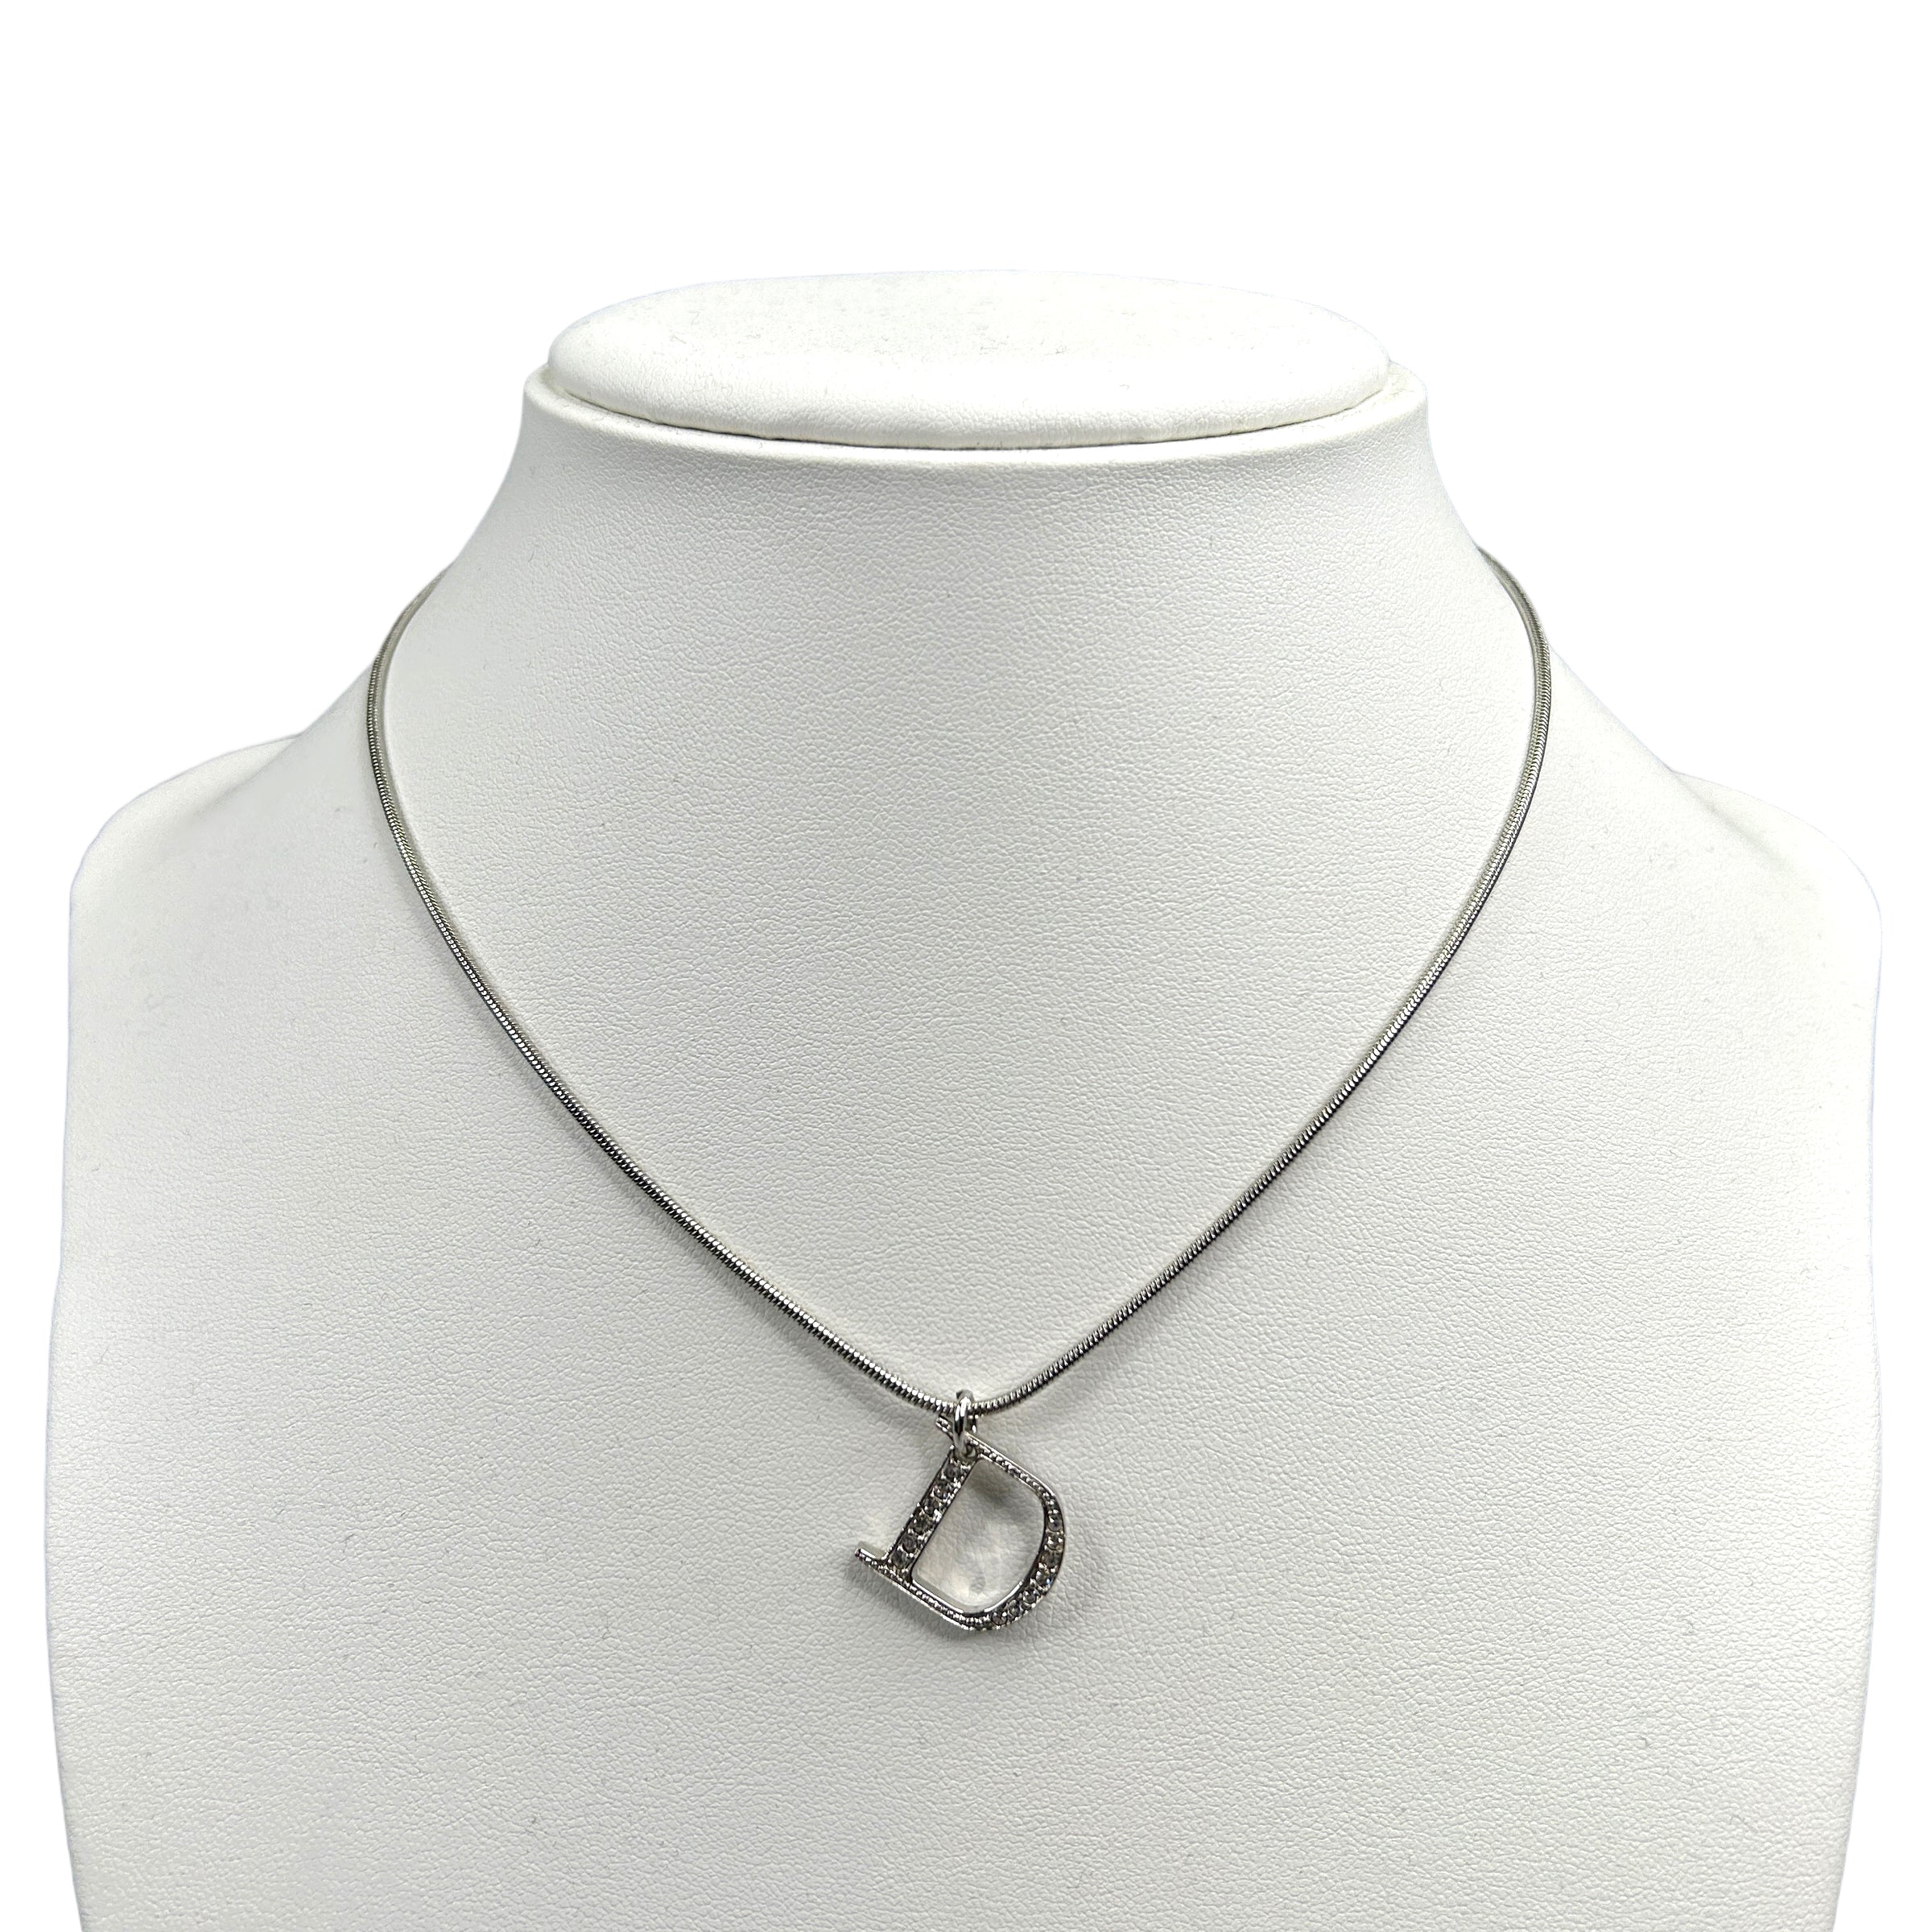 DIOR RHINESTONE D PENDANT NECKLACE SILVER PLATED